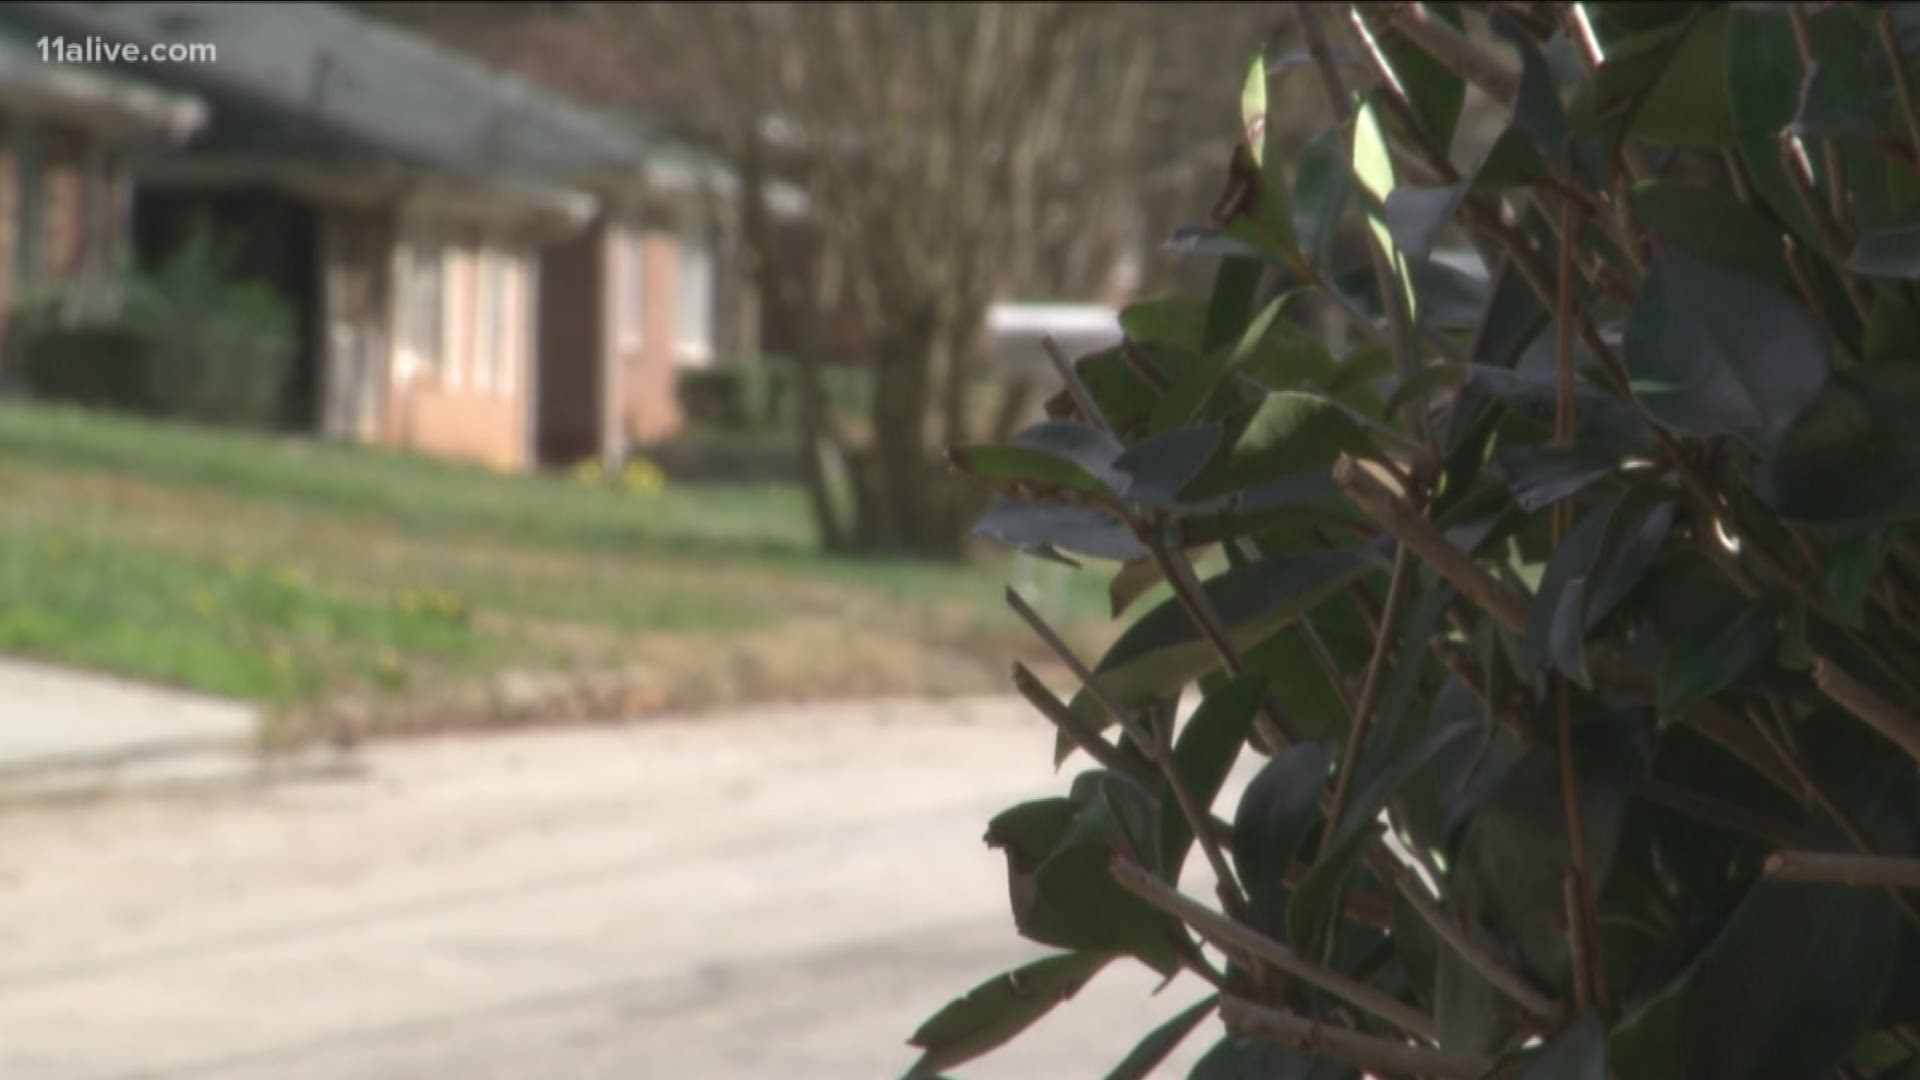 One man said his home had been broken into three times. Now he and others are fearful of the neighborhood they once loved.